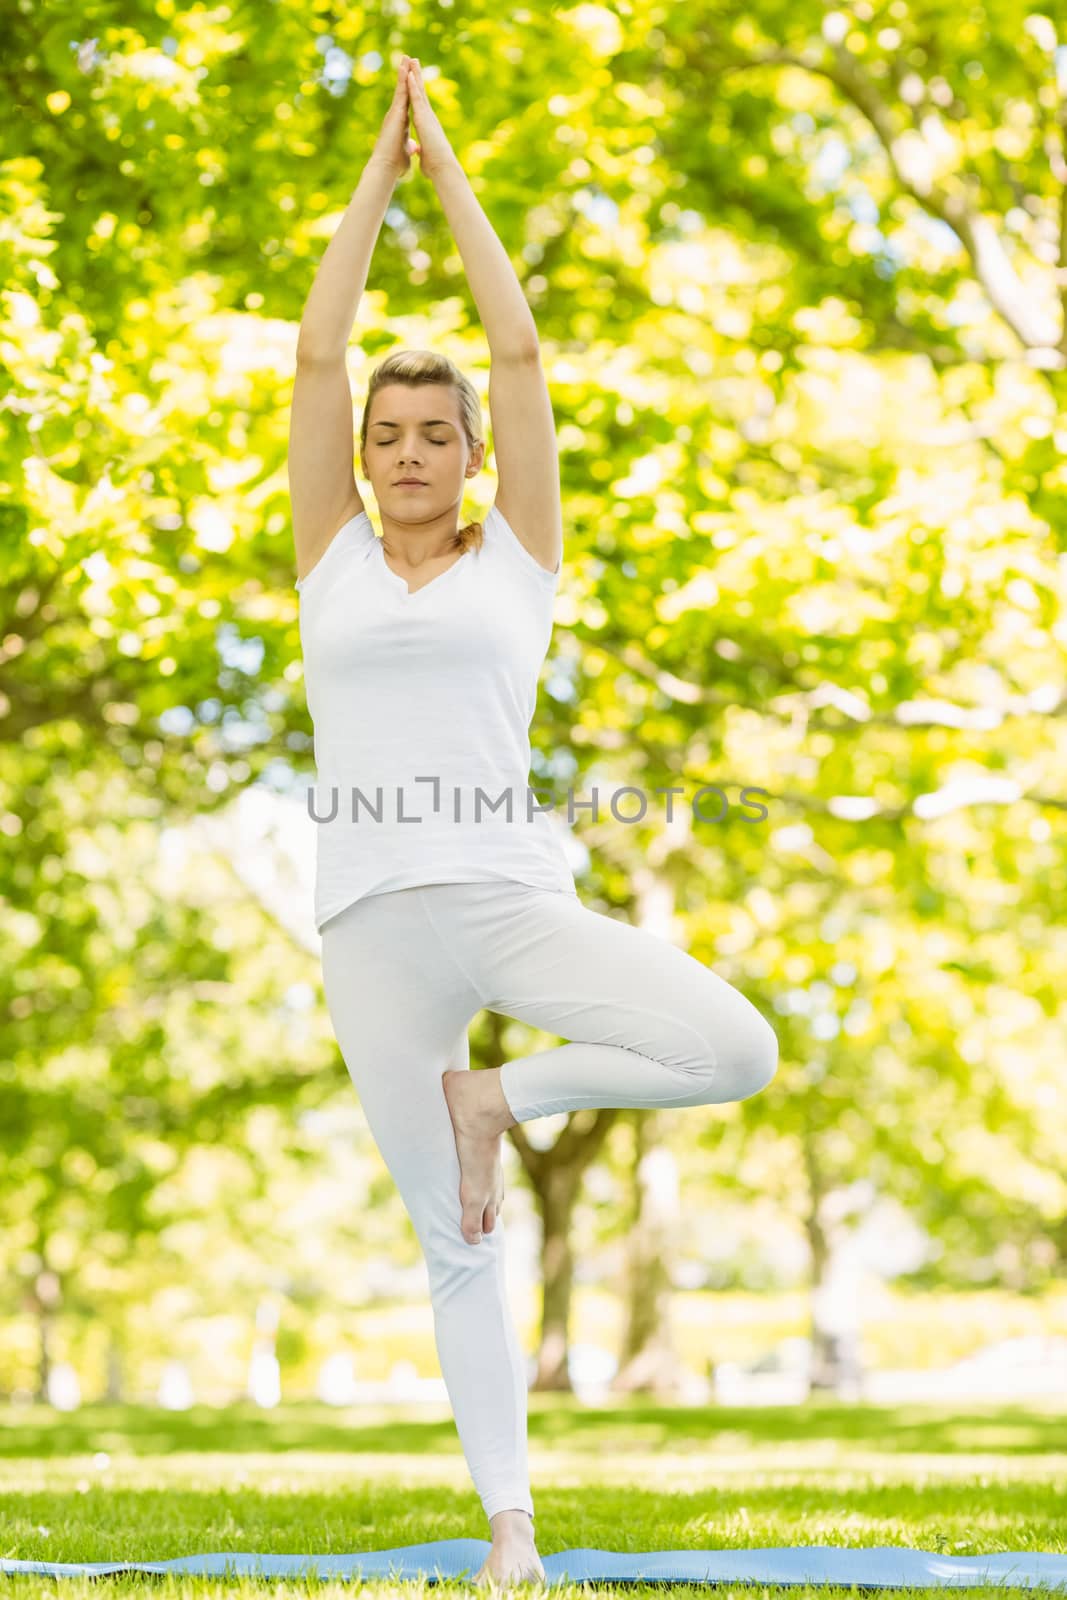 Peaceful blonde doing yoga in the park on a sunny day